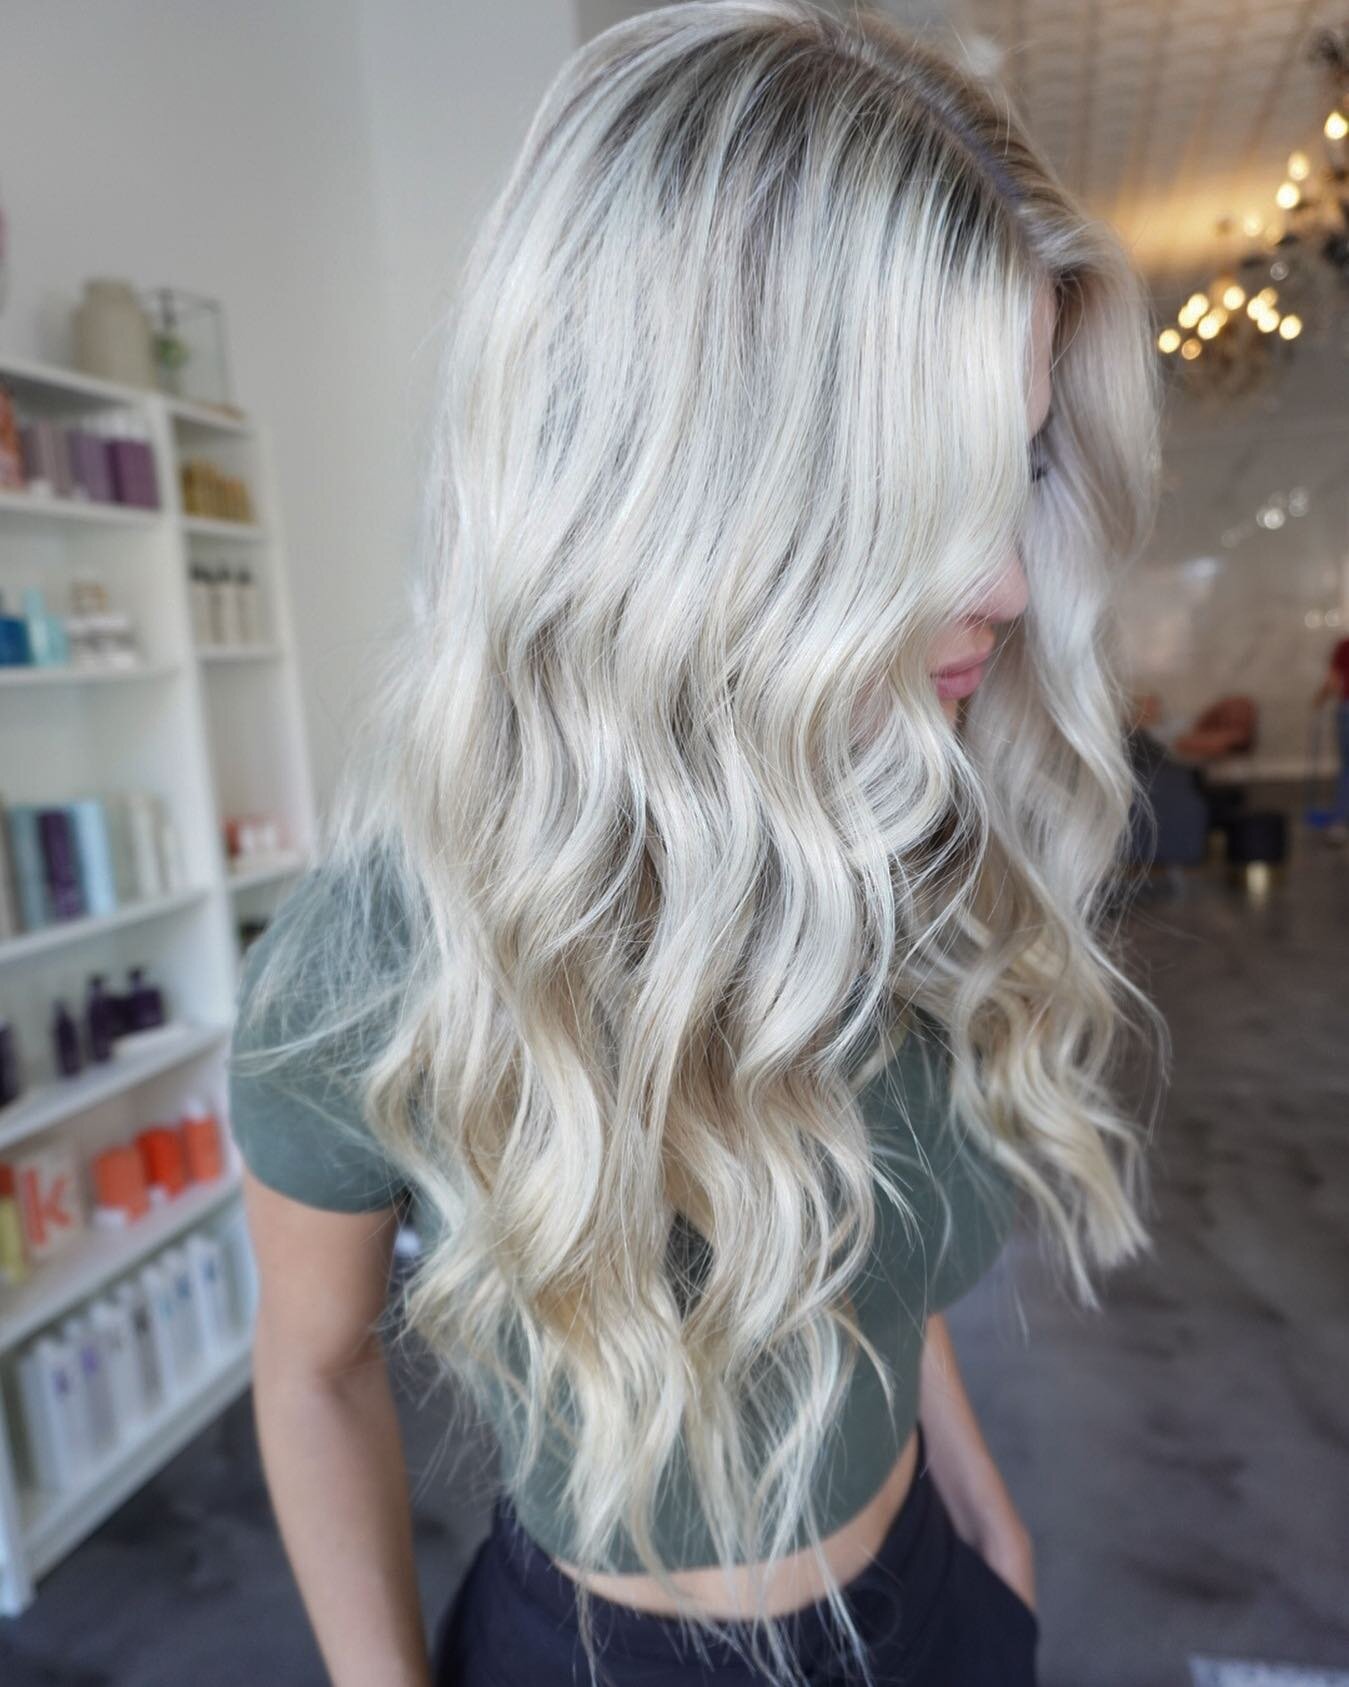 𝓑𝓵𝓸𝓷𝓭𝓮𝓼 𝓱𝓪𝓿𝓮 𝓶𝓸𝓻𝓮 𝓯𝓾𝓷 ✨

BUT being blonde takes more care &amp; work. Blonde hair is fragile &amp; susceptible to getting brassy. With the right stylist &amp; the right at home regimen you can successfully be blonde + have more fun 